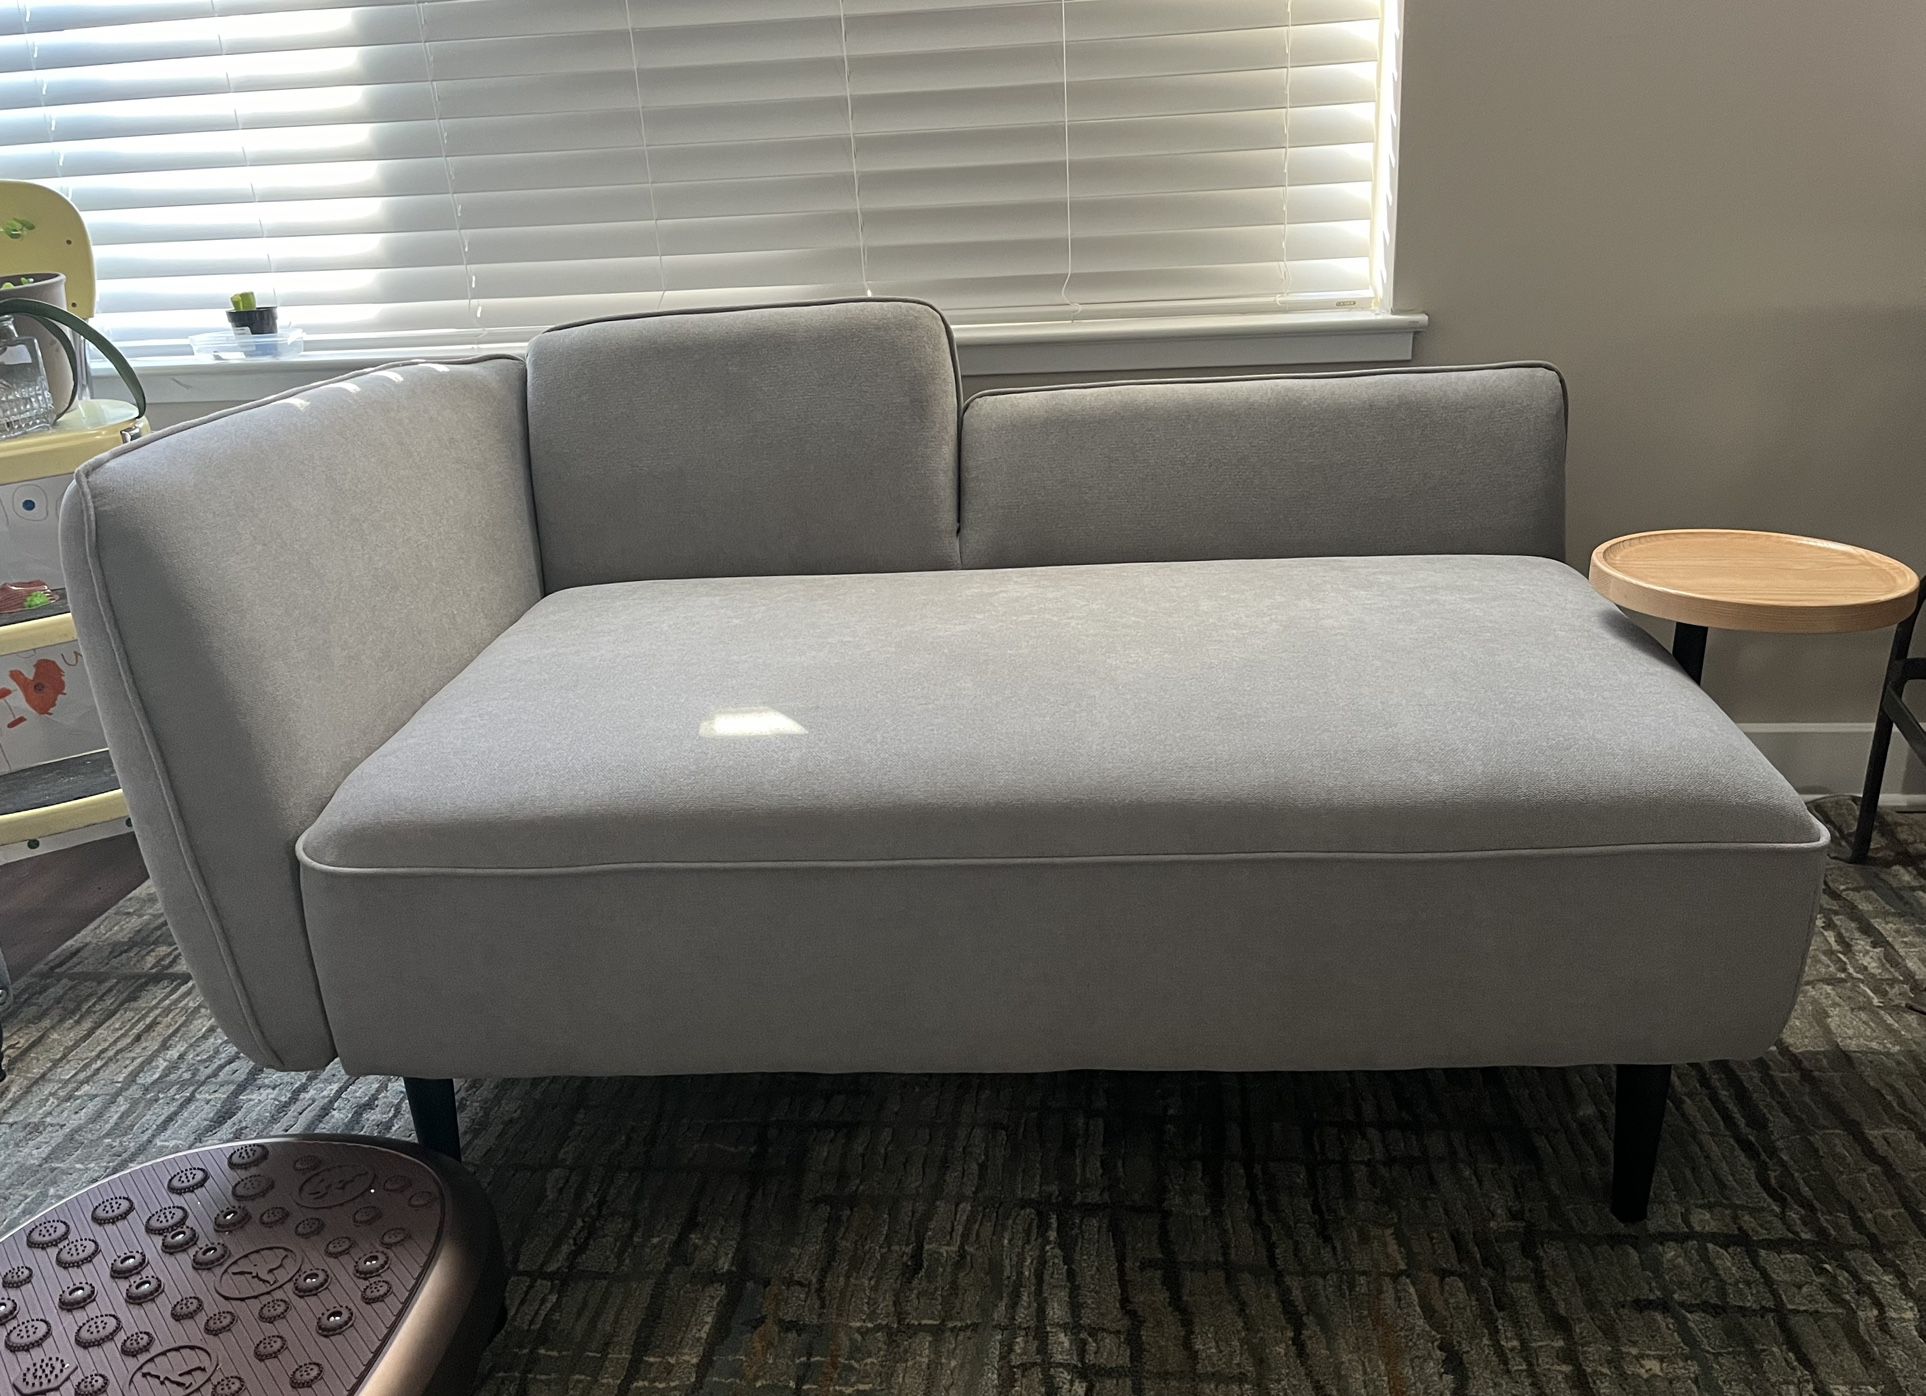 Small grey love seat/couch  